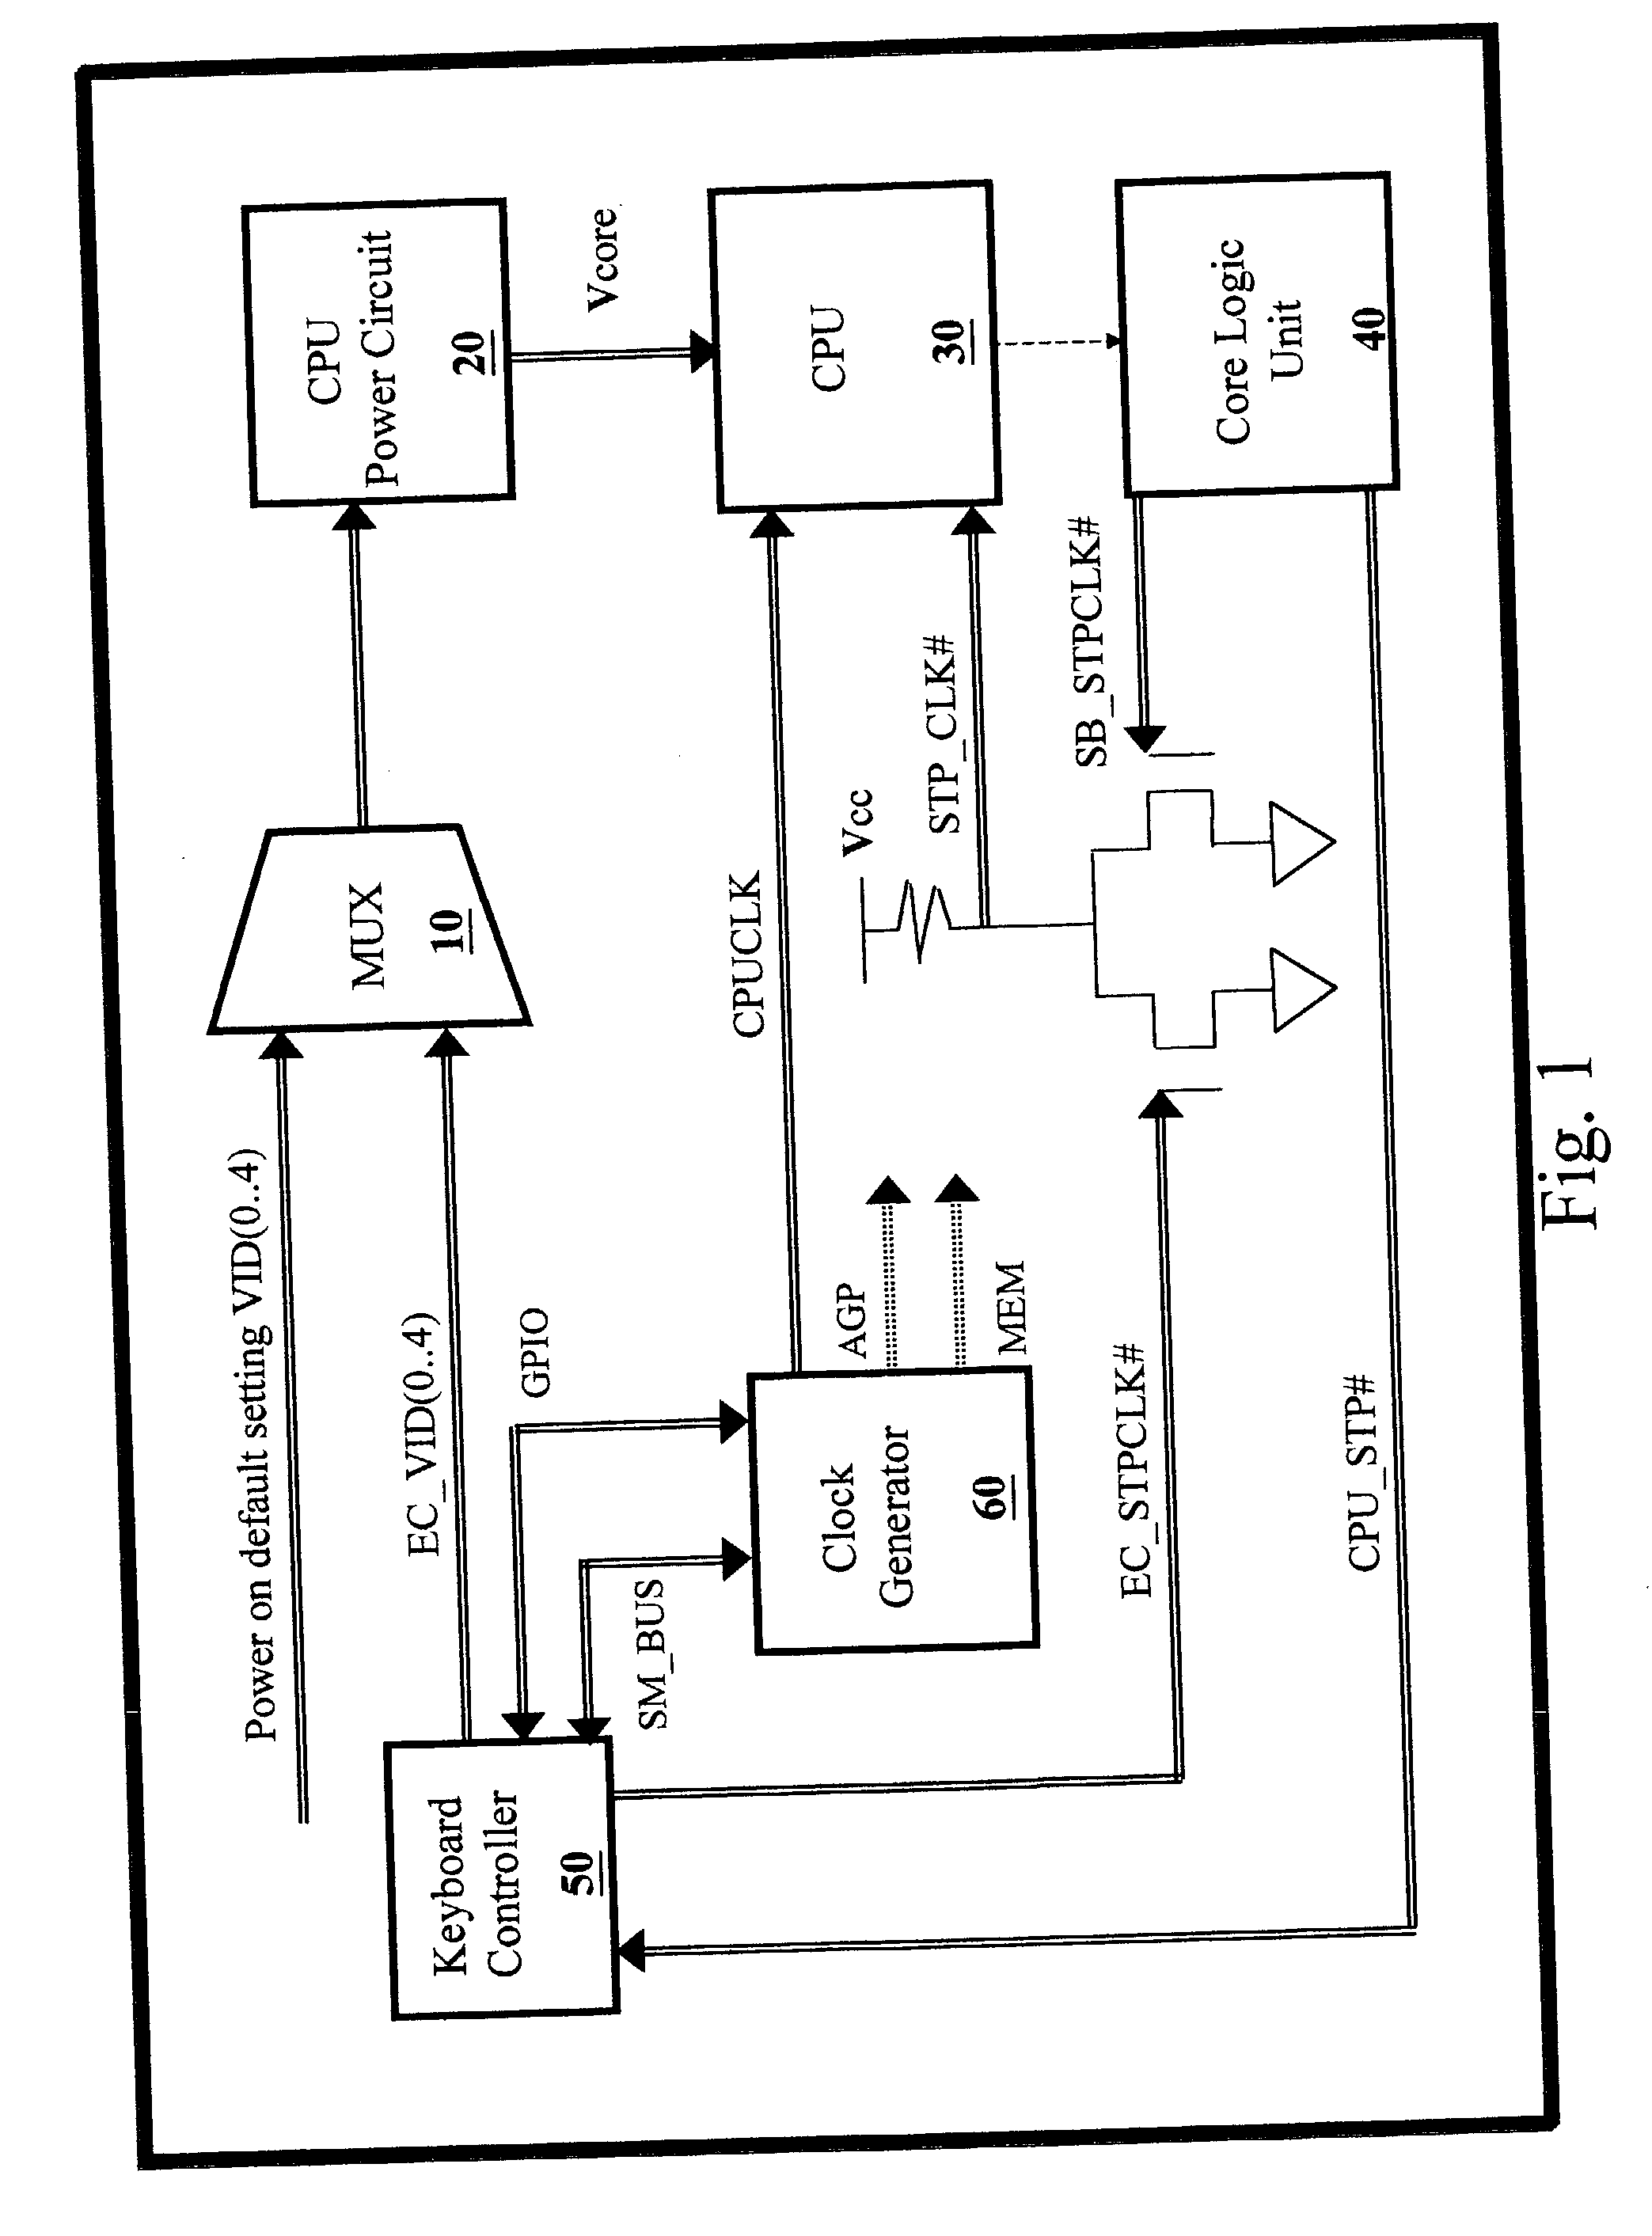 Power management method of portable computer